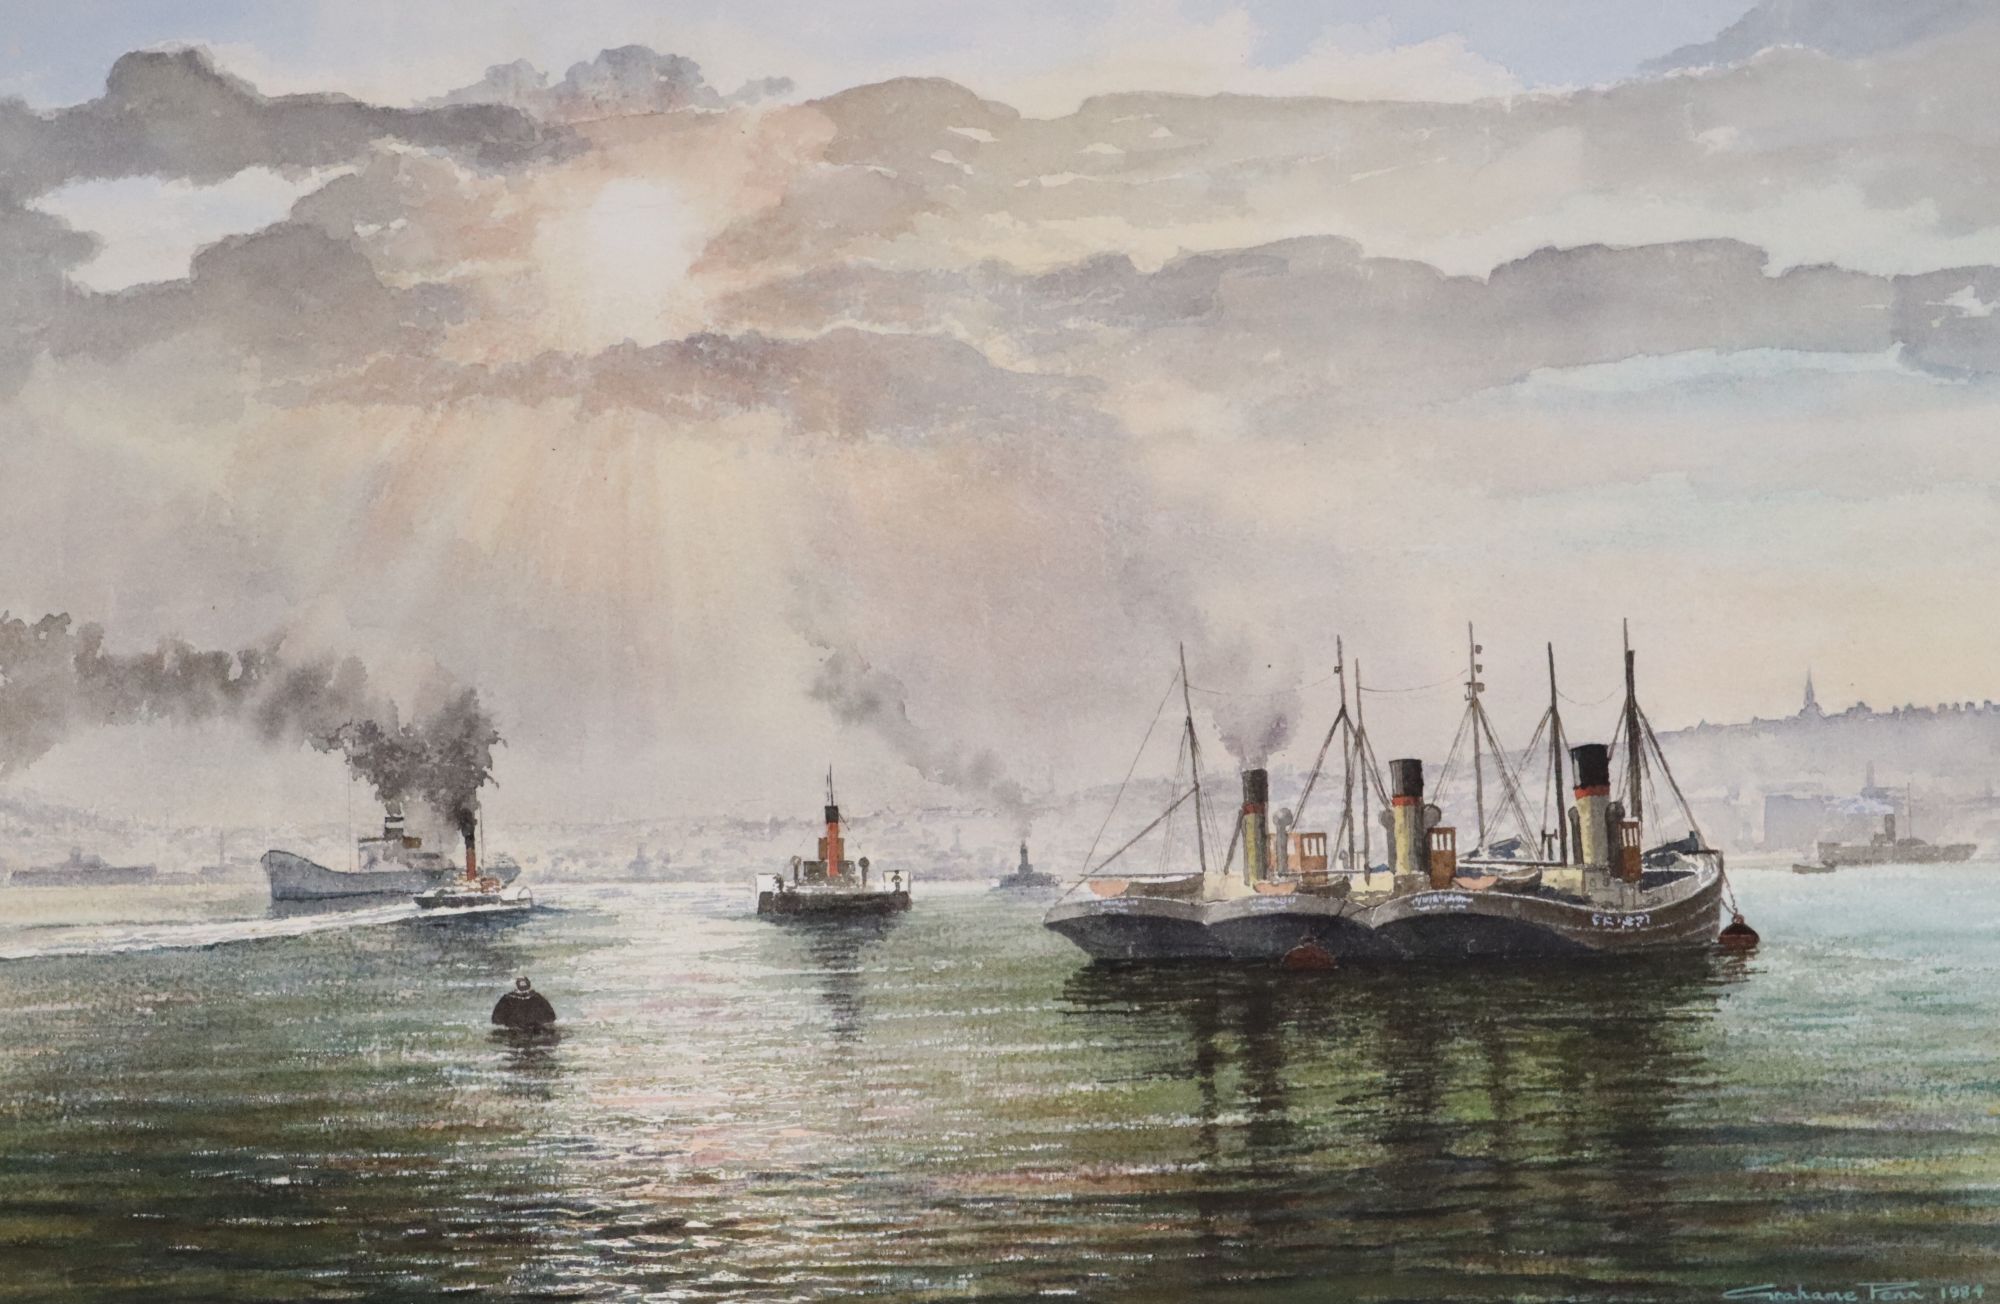 Graham Penn, watercolour, Tug boats in harbour, signed and dated 1984, 35 x 52cm, unframed